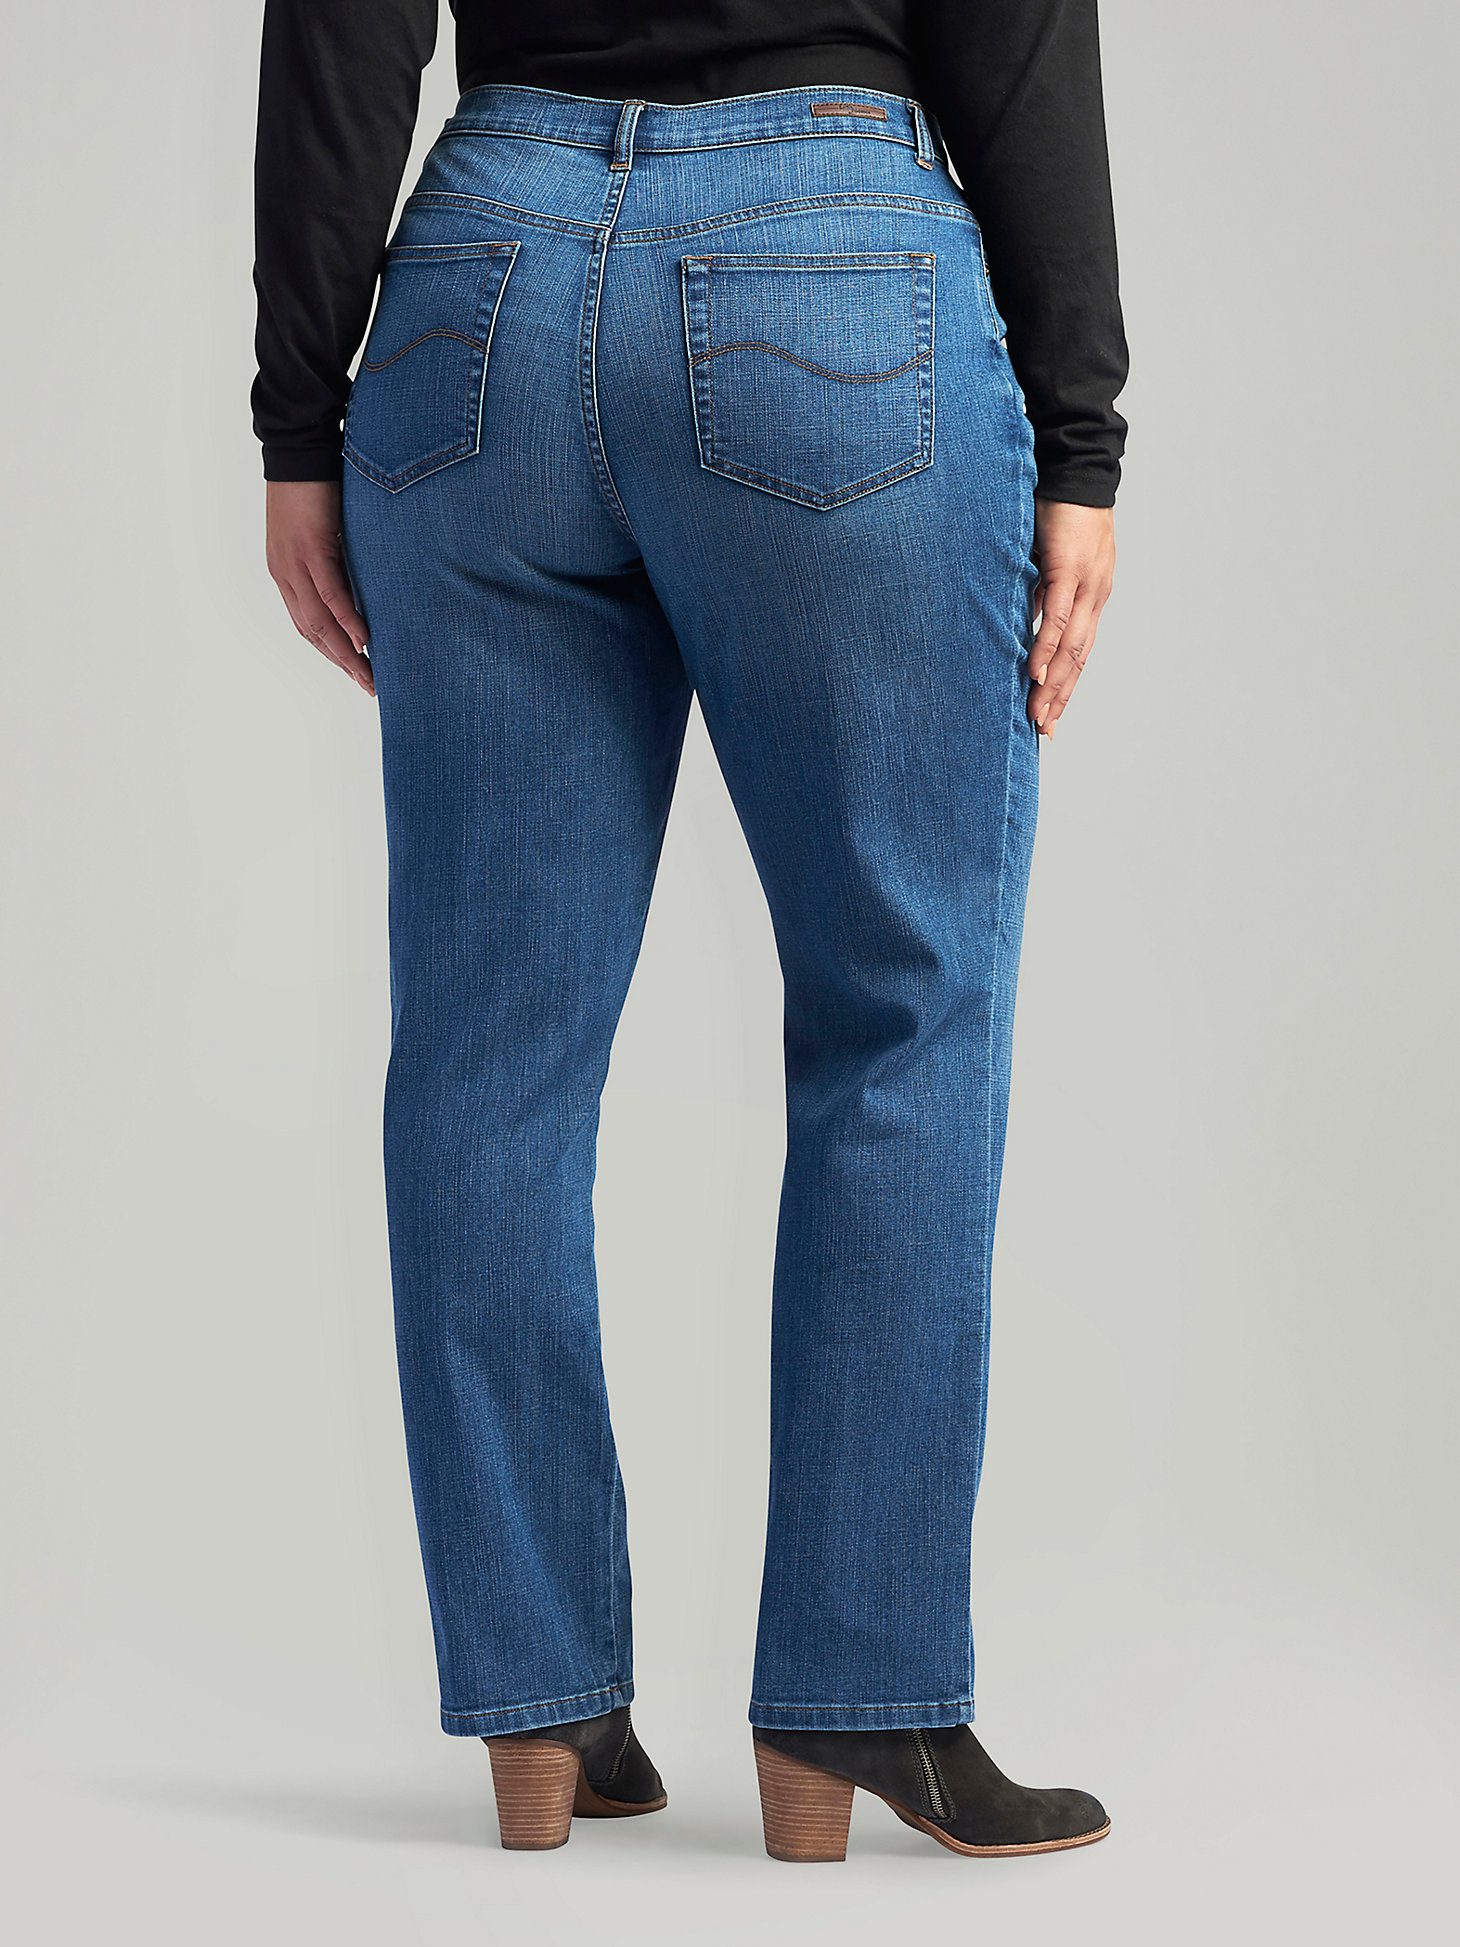 Women’s Stretch Relaxed Fit Straight Leg Jean (Plus) in Meridian alternative view 1